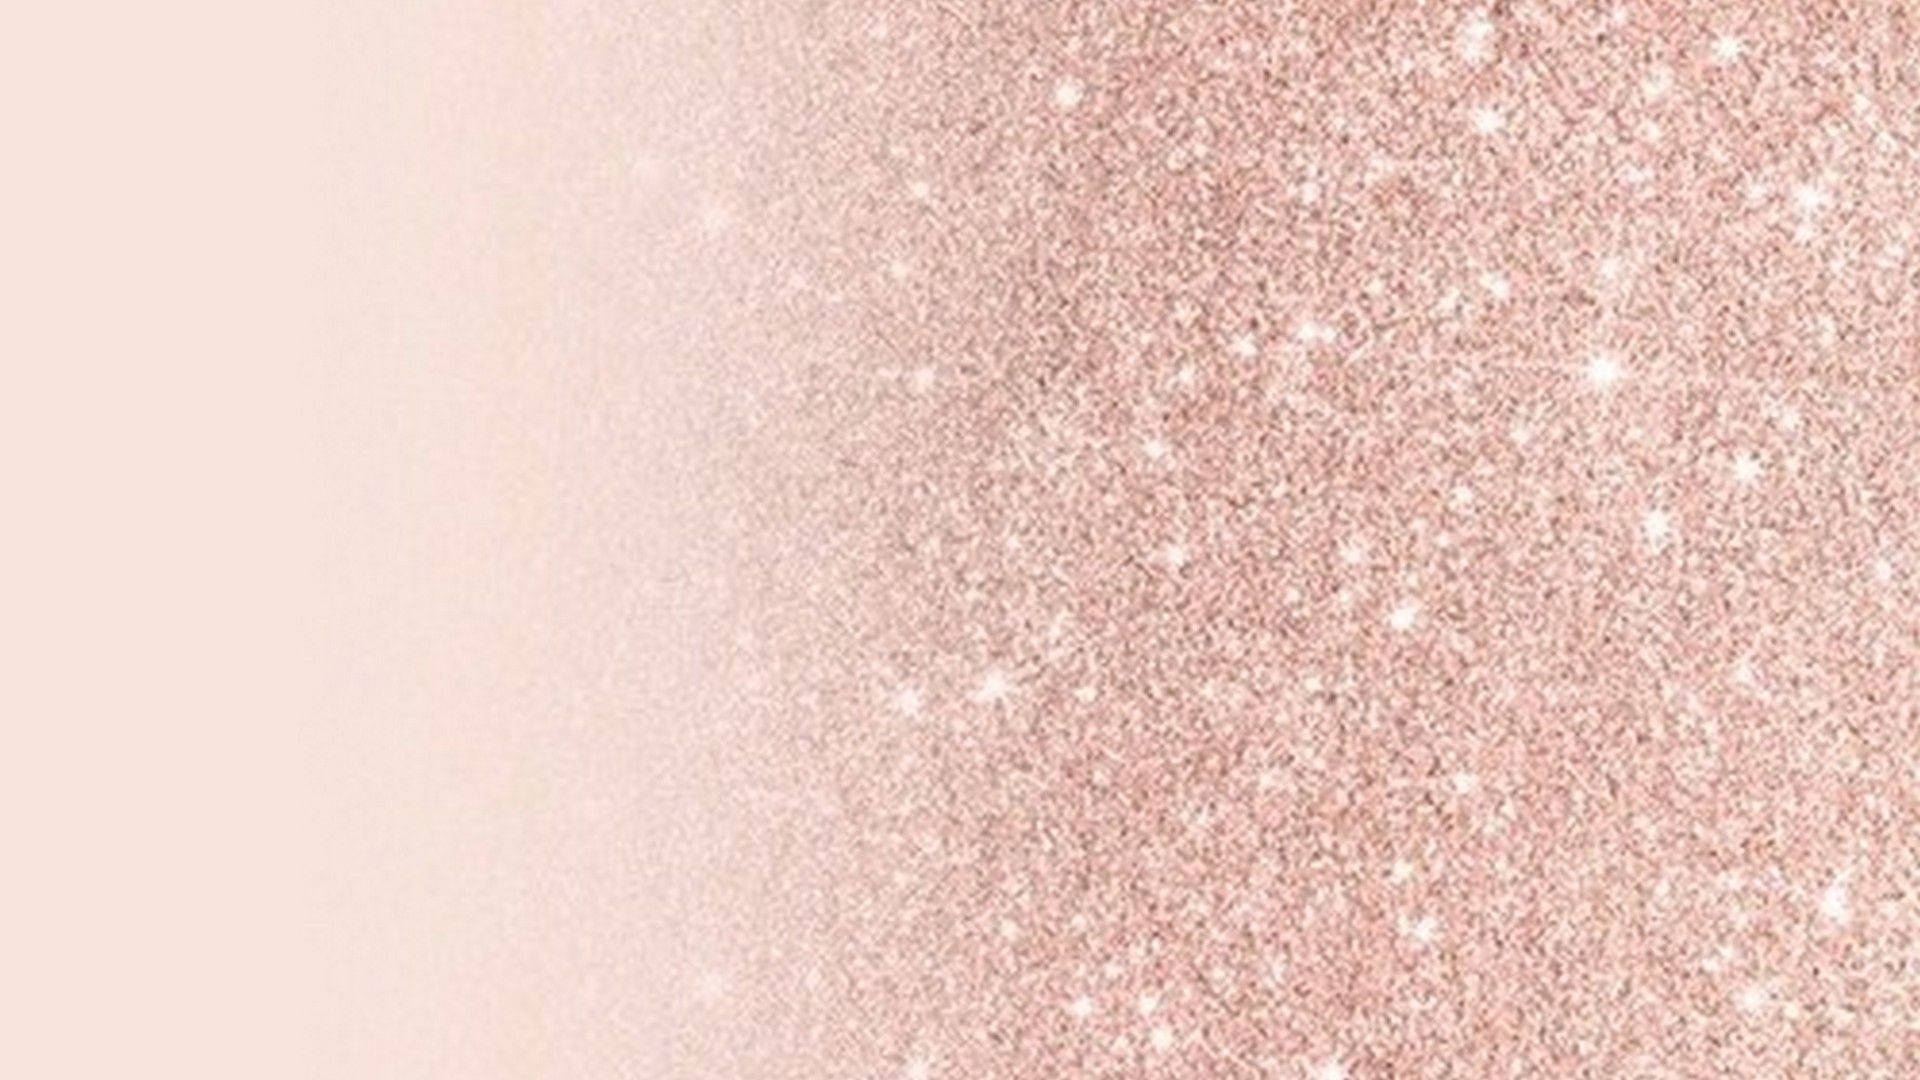 Decorate your room with the beautiful duo of glittered and plain Rose Gold! Wallpaper